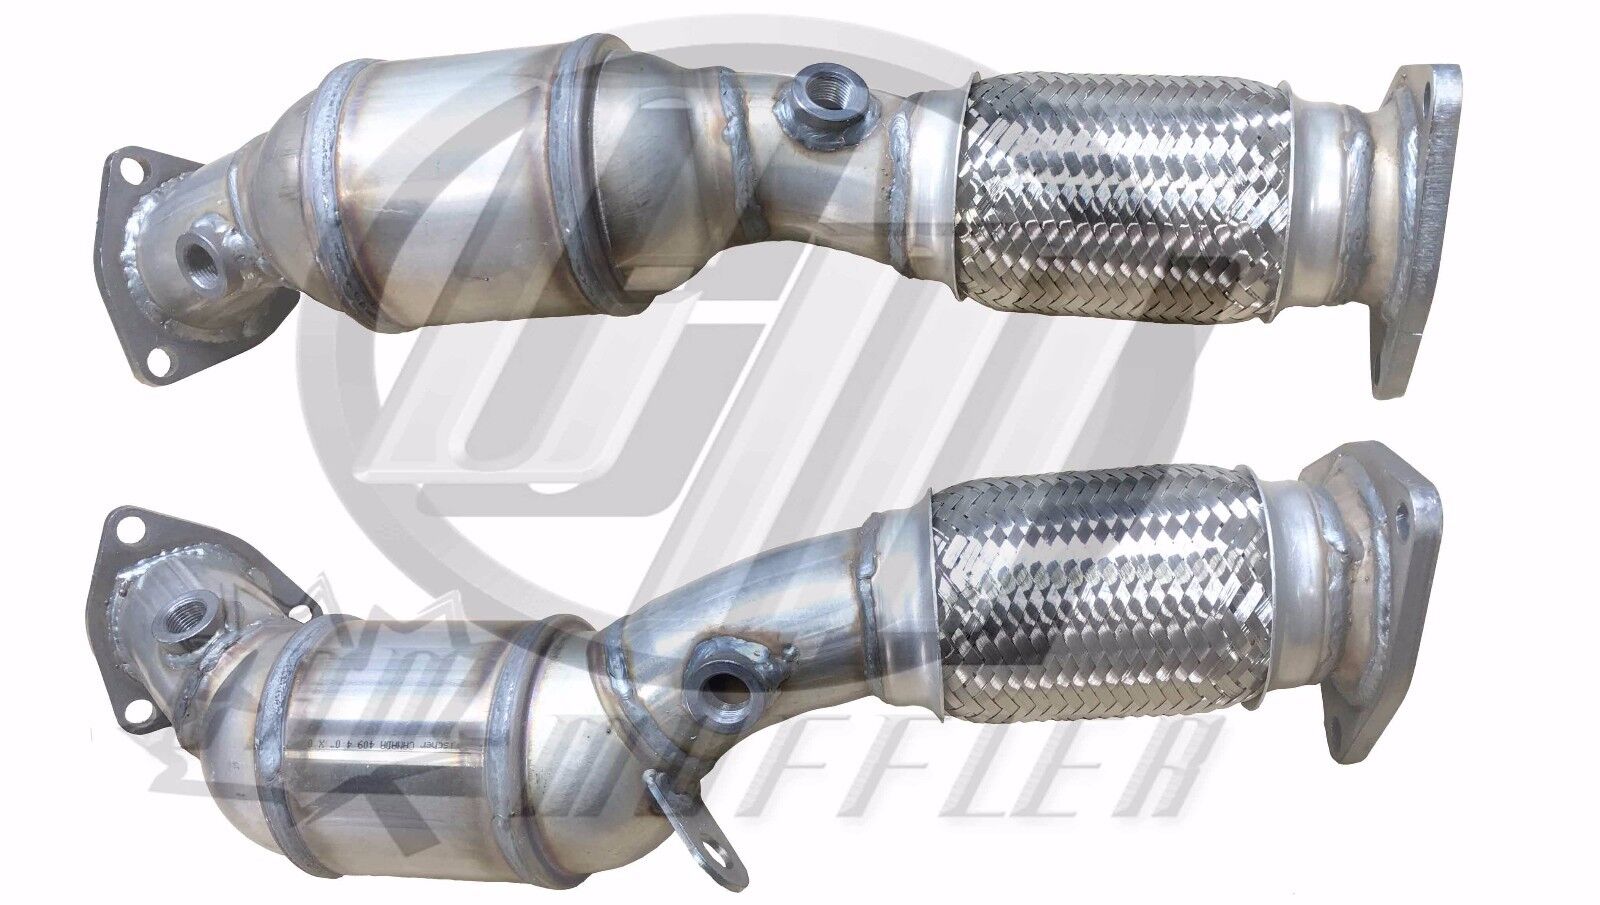 AUDI Q7 4.2L Pair of BANK1 & BANK2 Catalytic Converter 2007 TO 2010 15HQ7-DS/PS